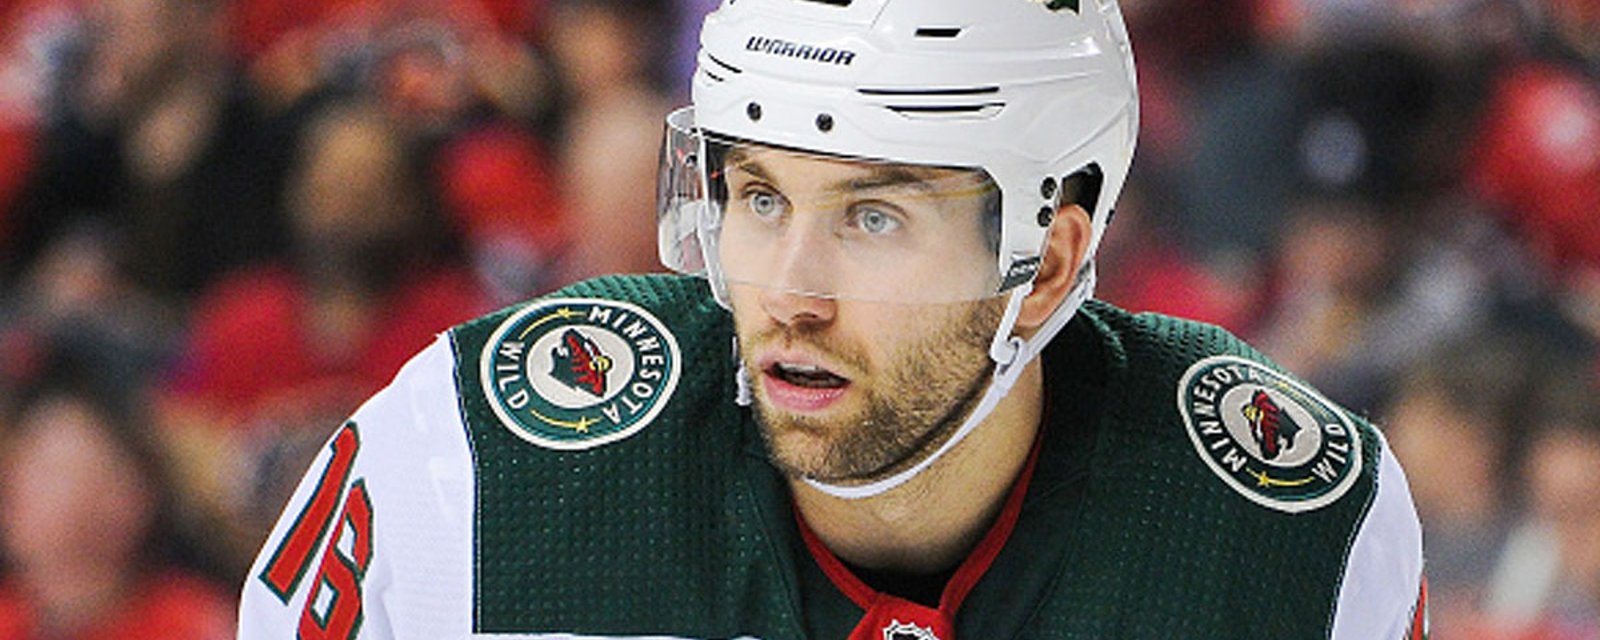 Zucker is pissed off about finding out latest trade rumor! 